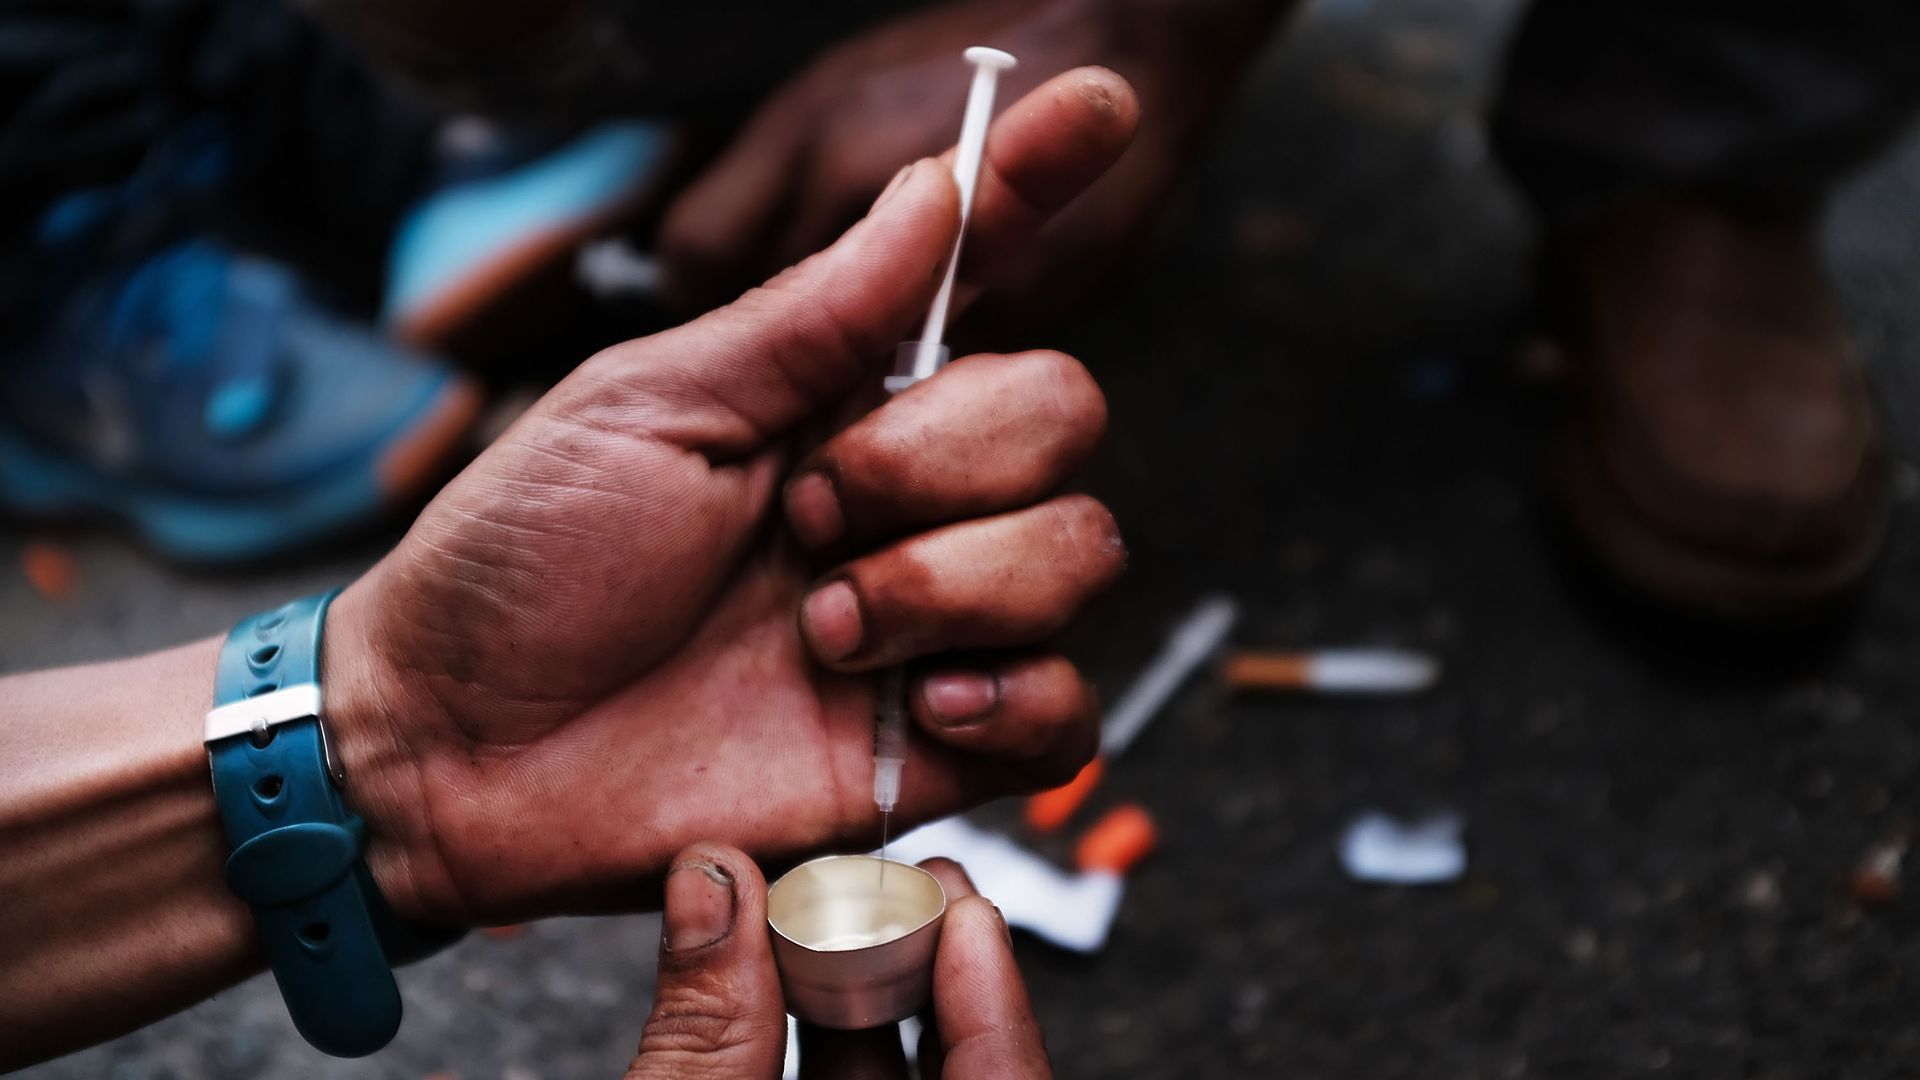 Photo of a heroin user's outstretched hand, holding a needle and preparing to shoot up